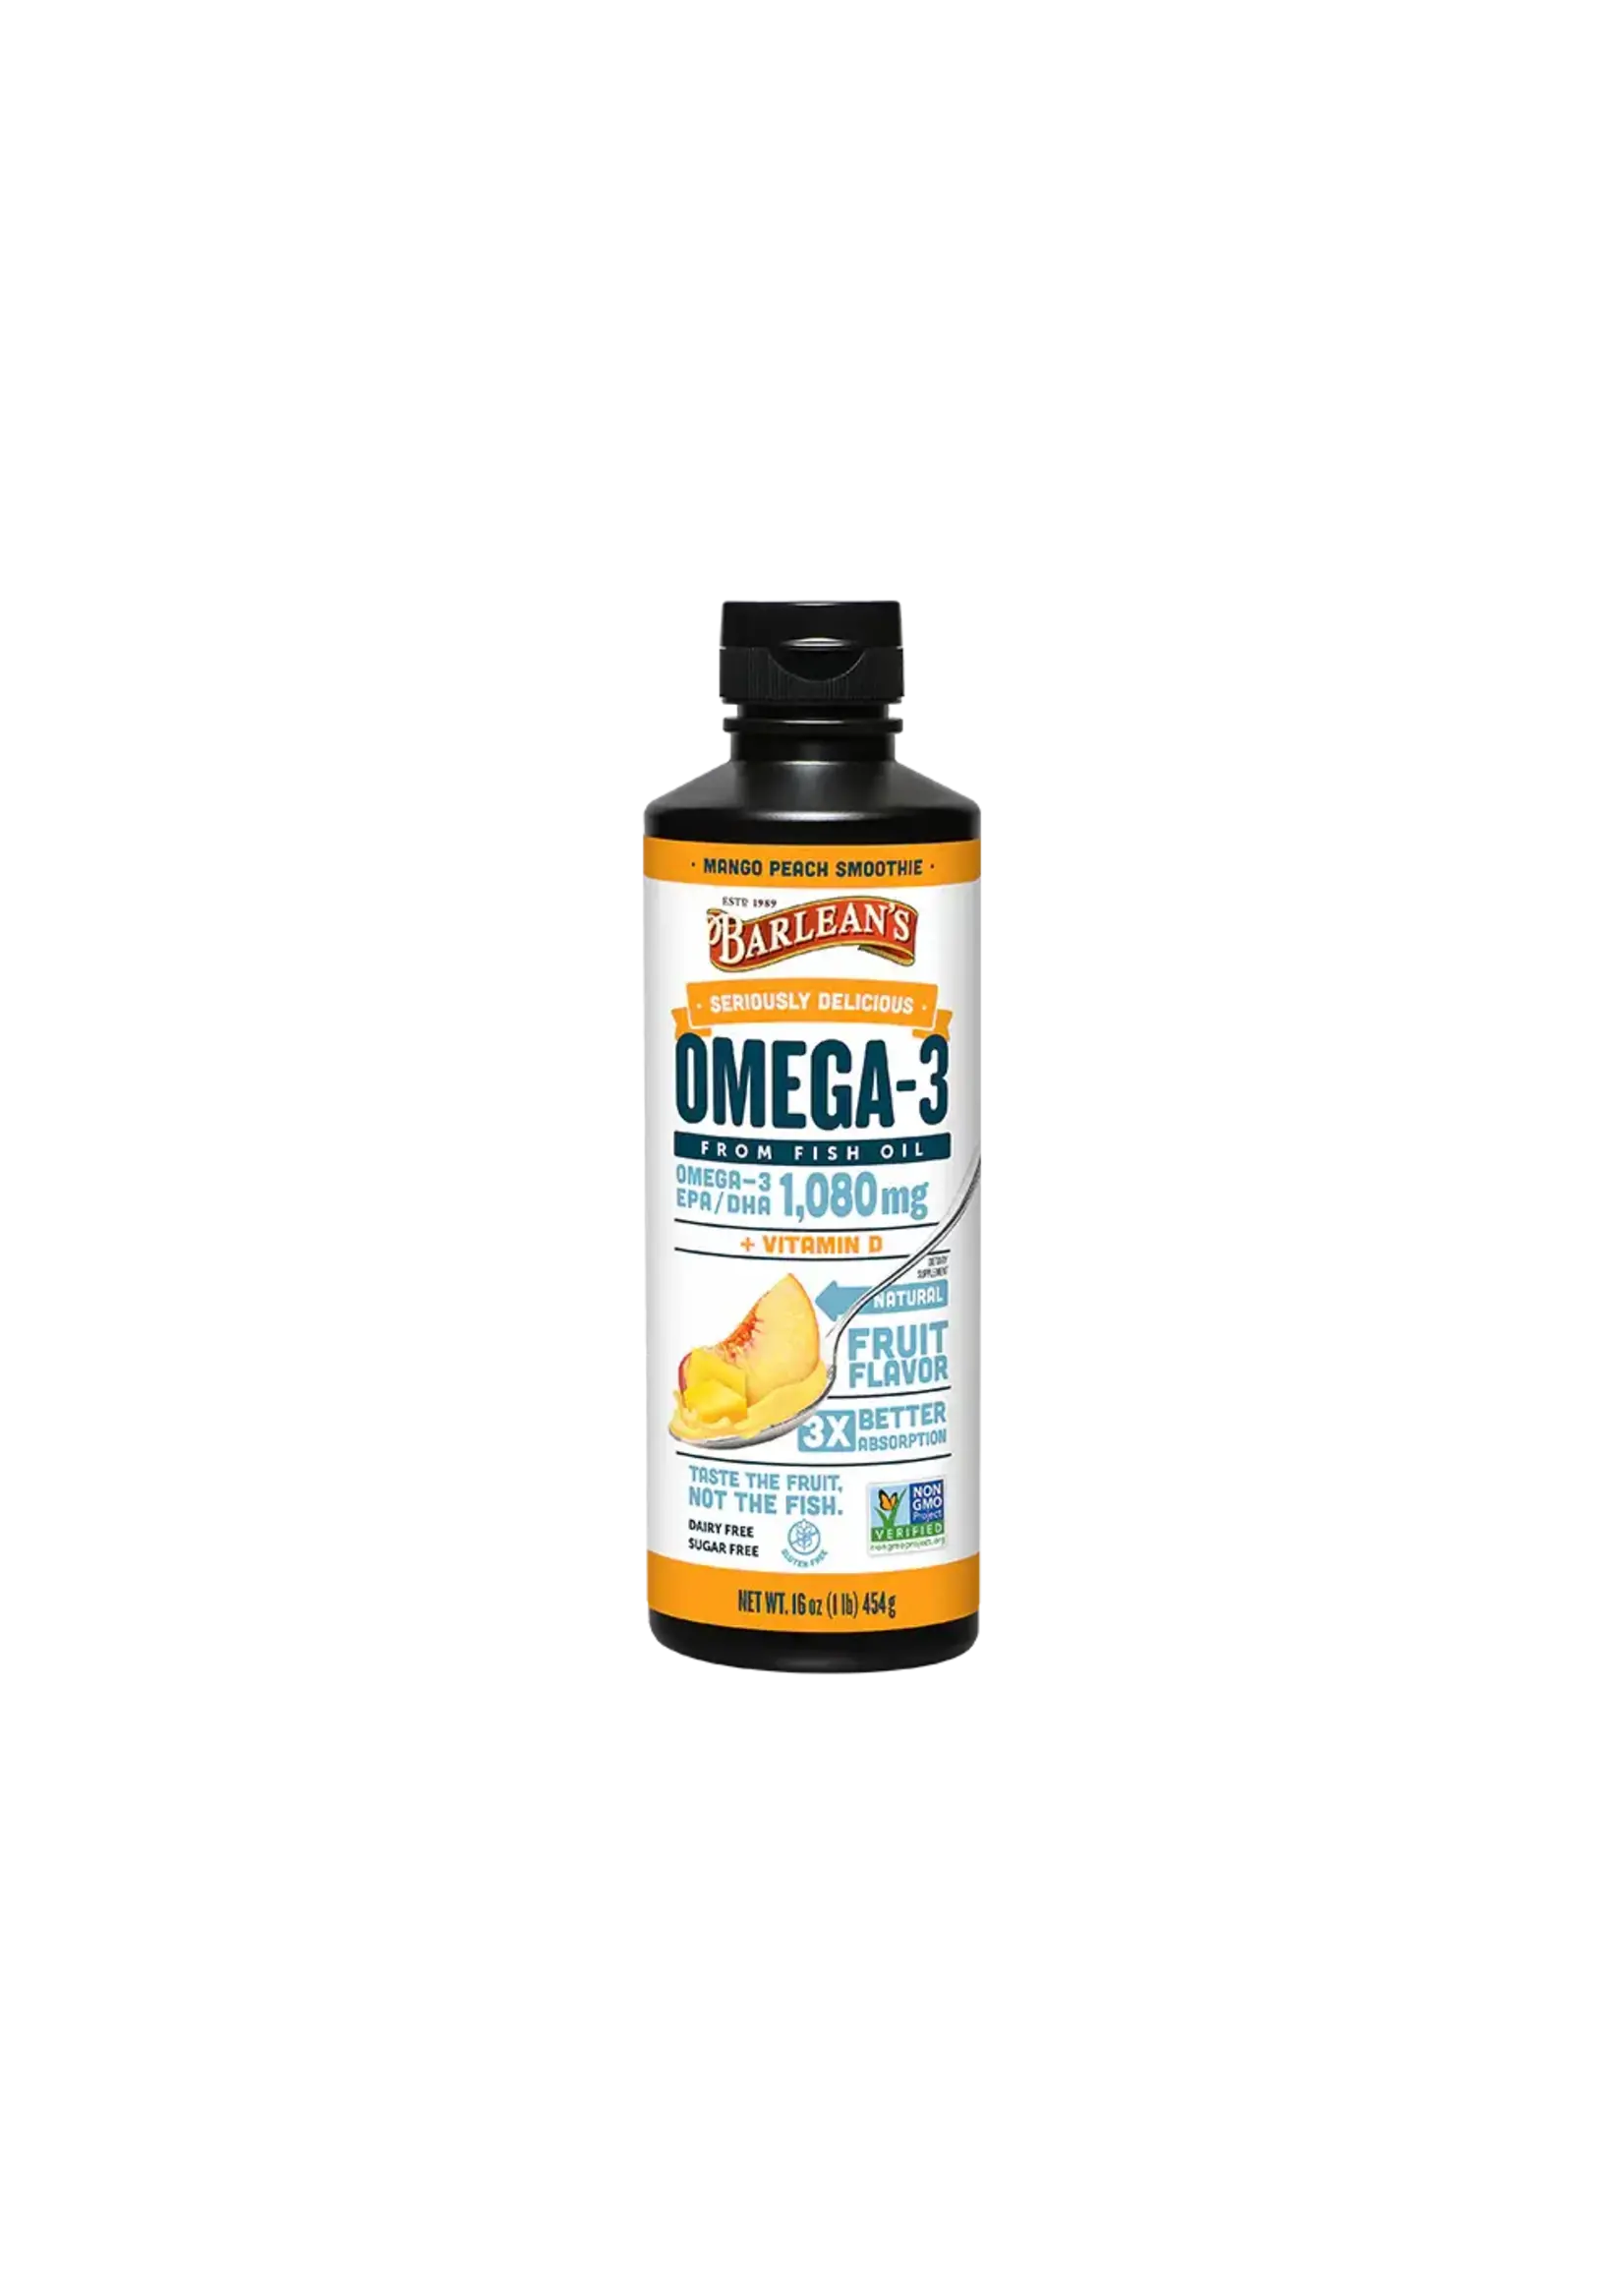 Seriously Delicious Omega-3 Fish Oil